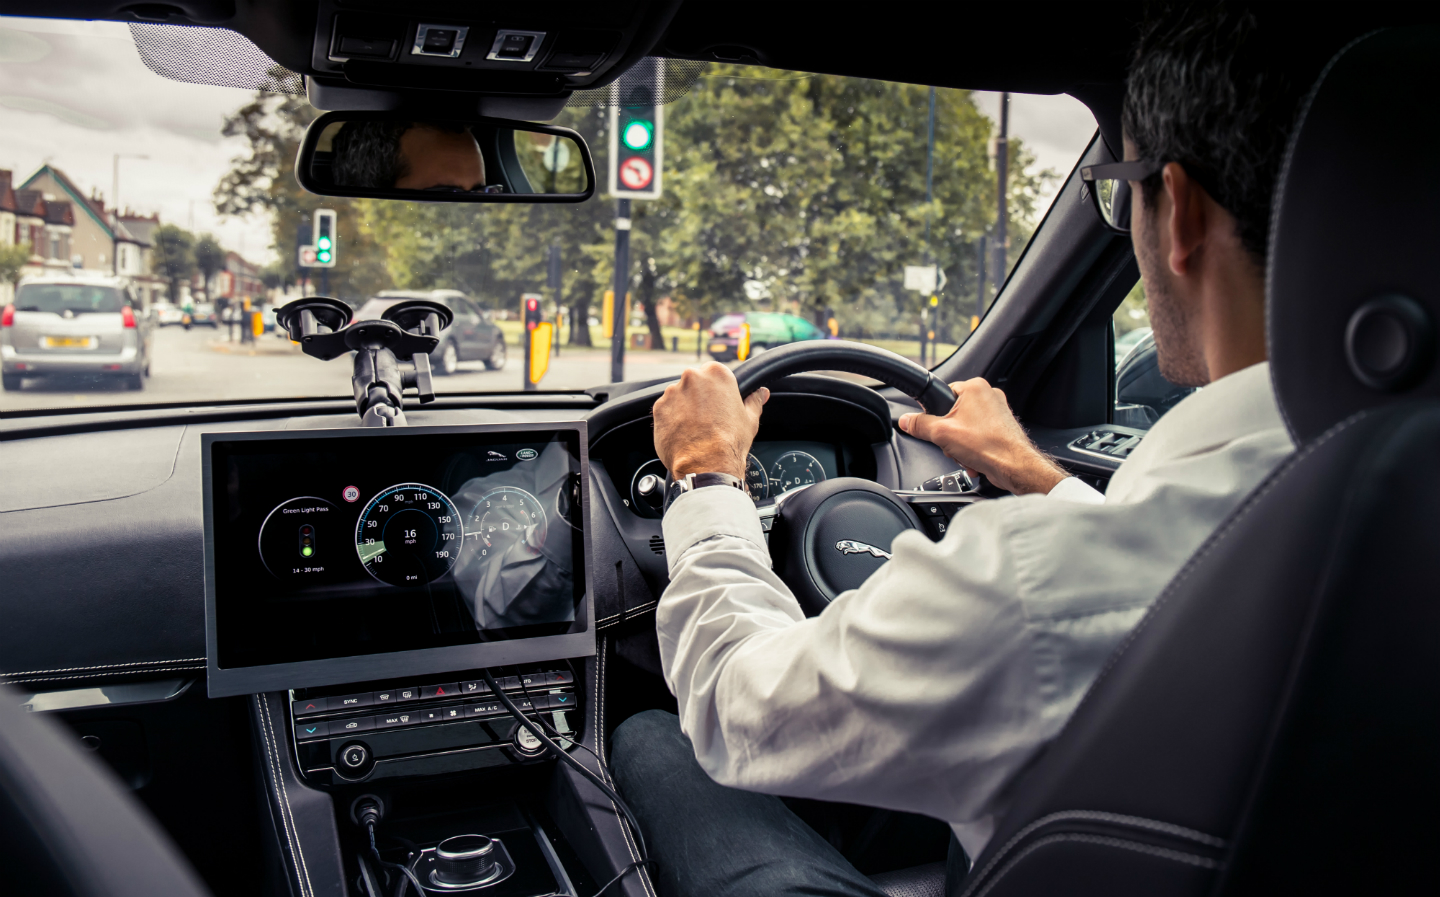 Jaguar solves congestion delays with tech that "talks" to traffic lights